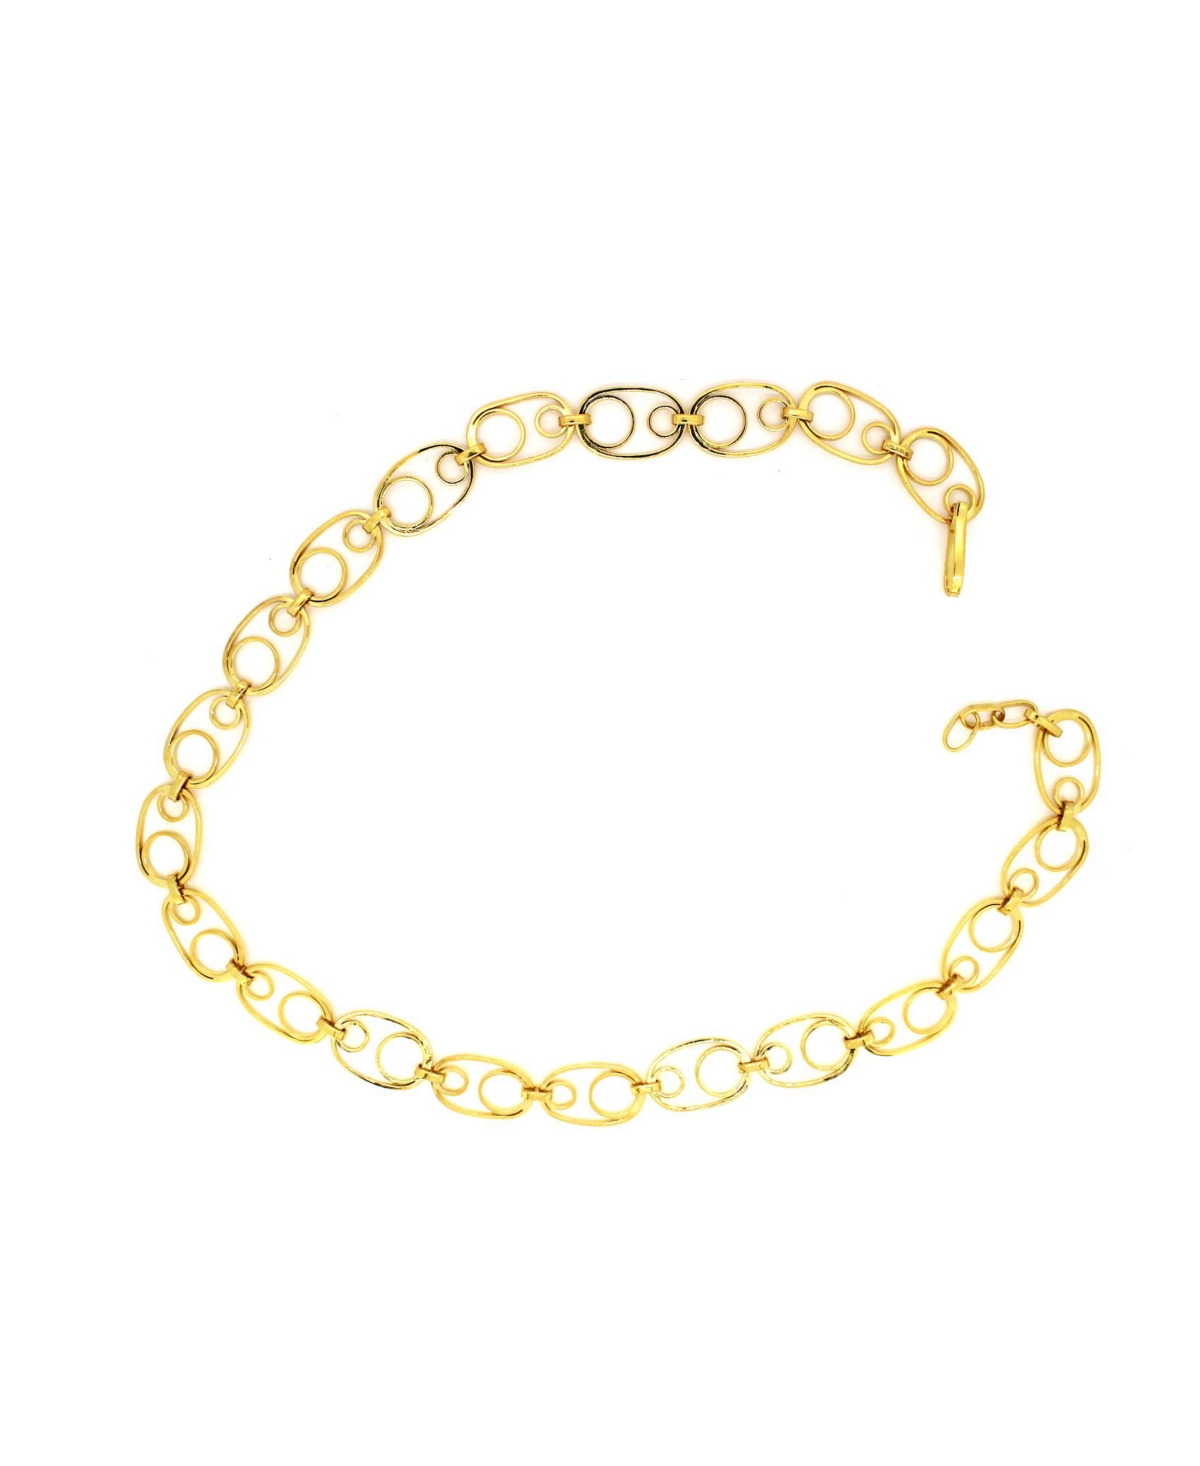 Hoop Serenity Necklace - Gold Plated